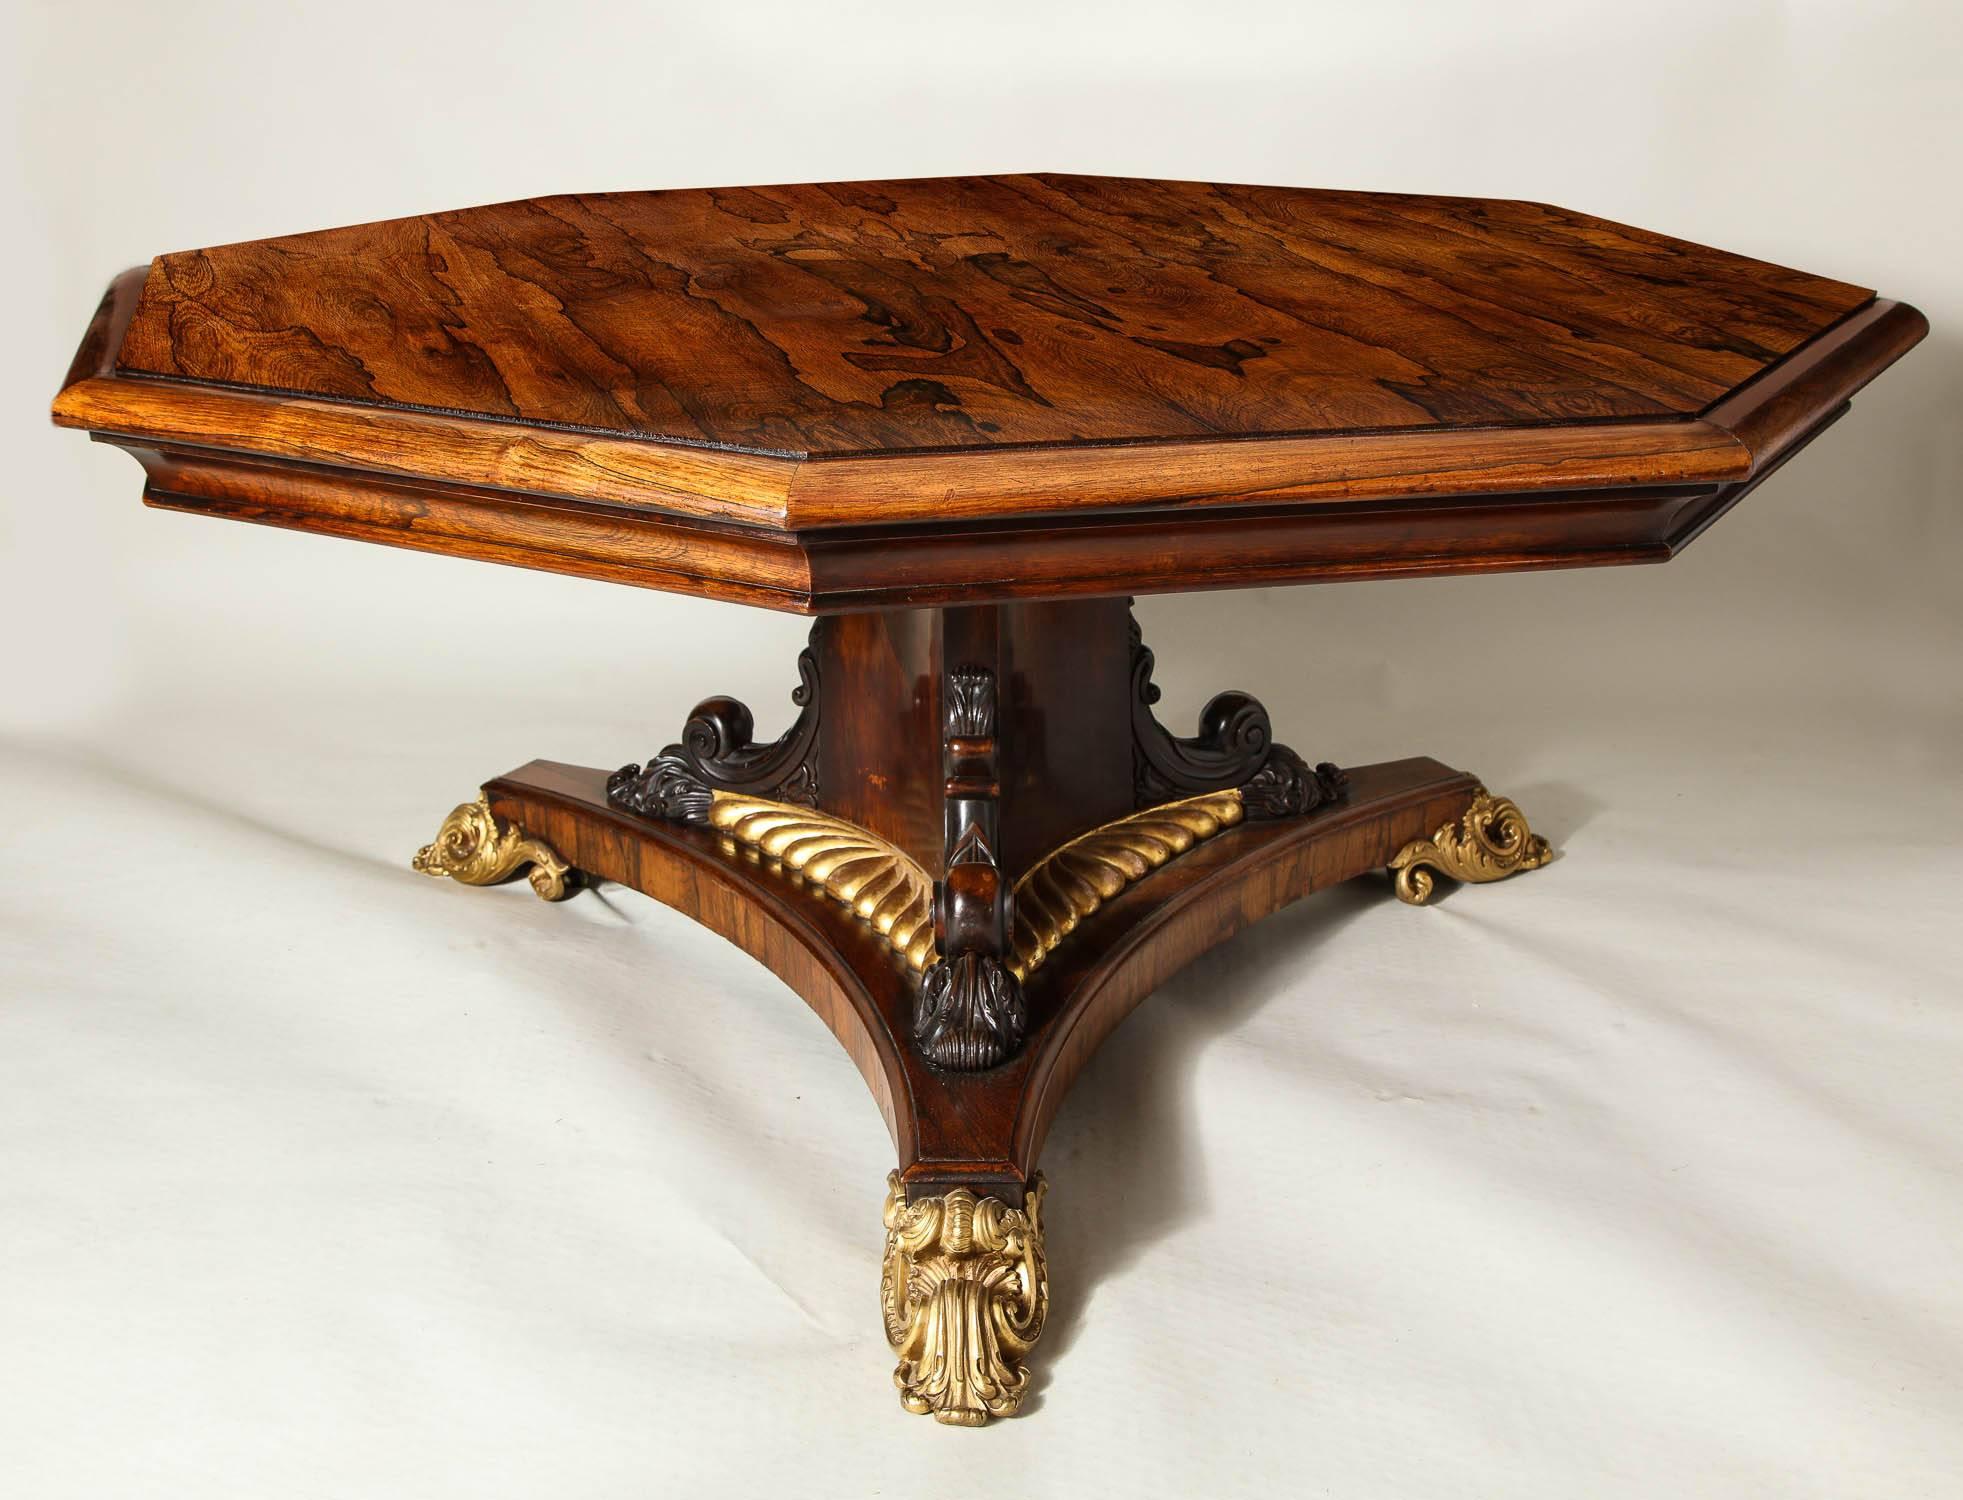 English Regency Gilt Bronze-Mounted Rosewood Octagonal Centre Table